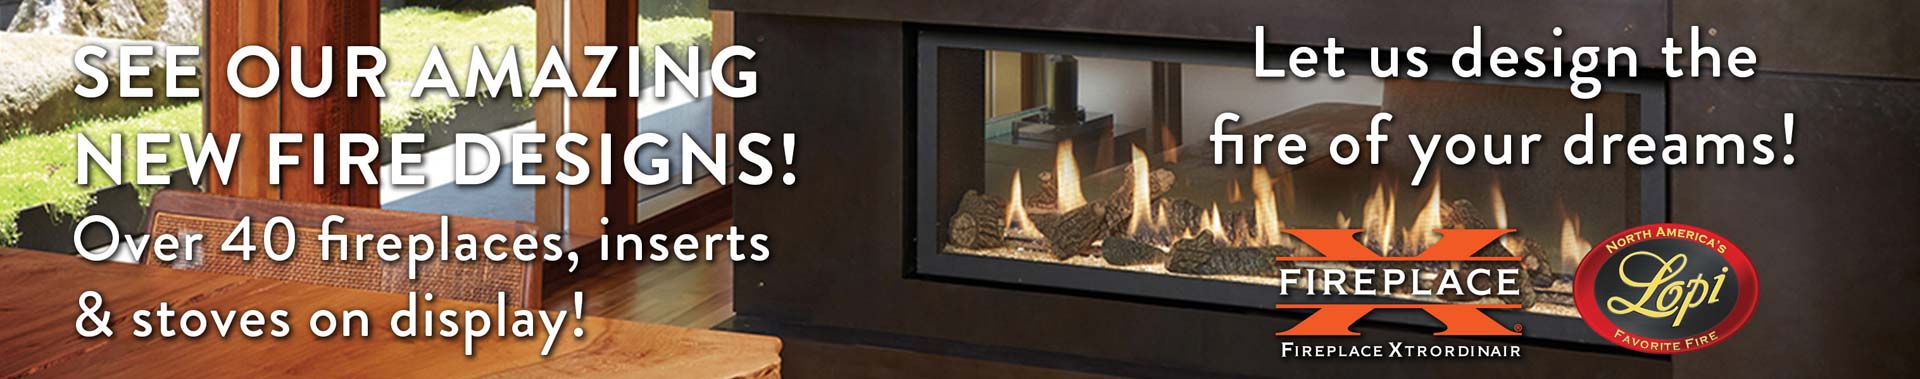 See our amazing new fire designs!